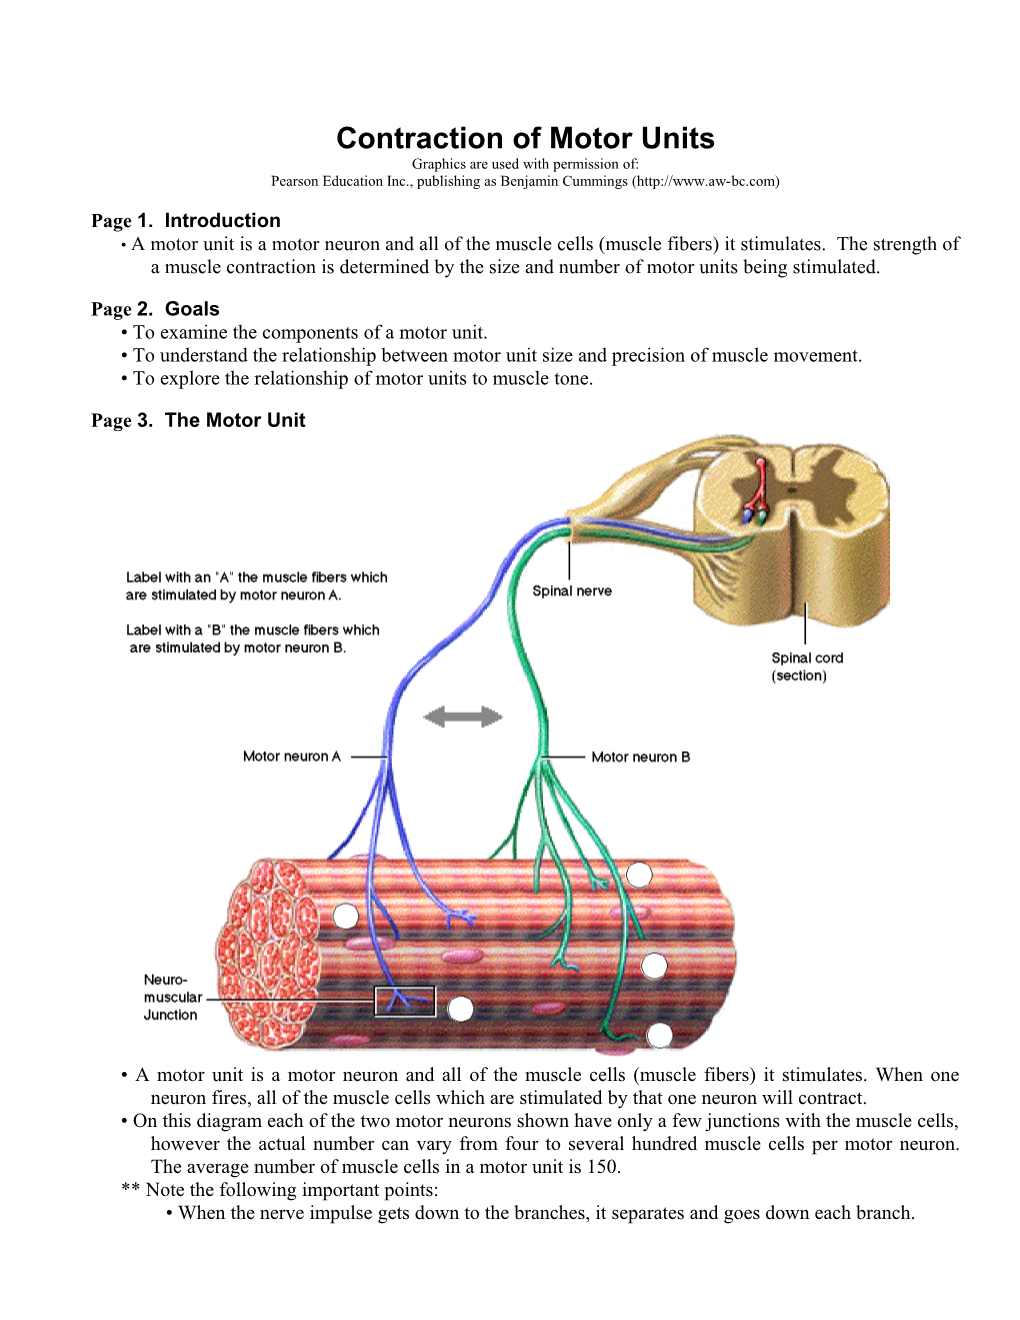 Contraction of Motor Units